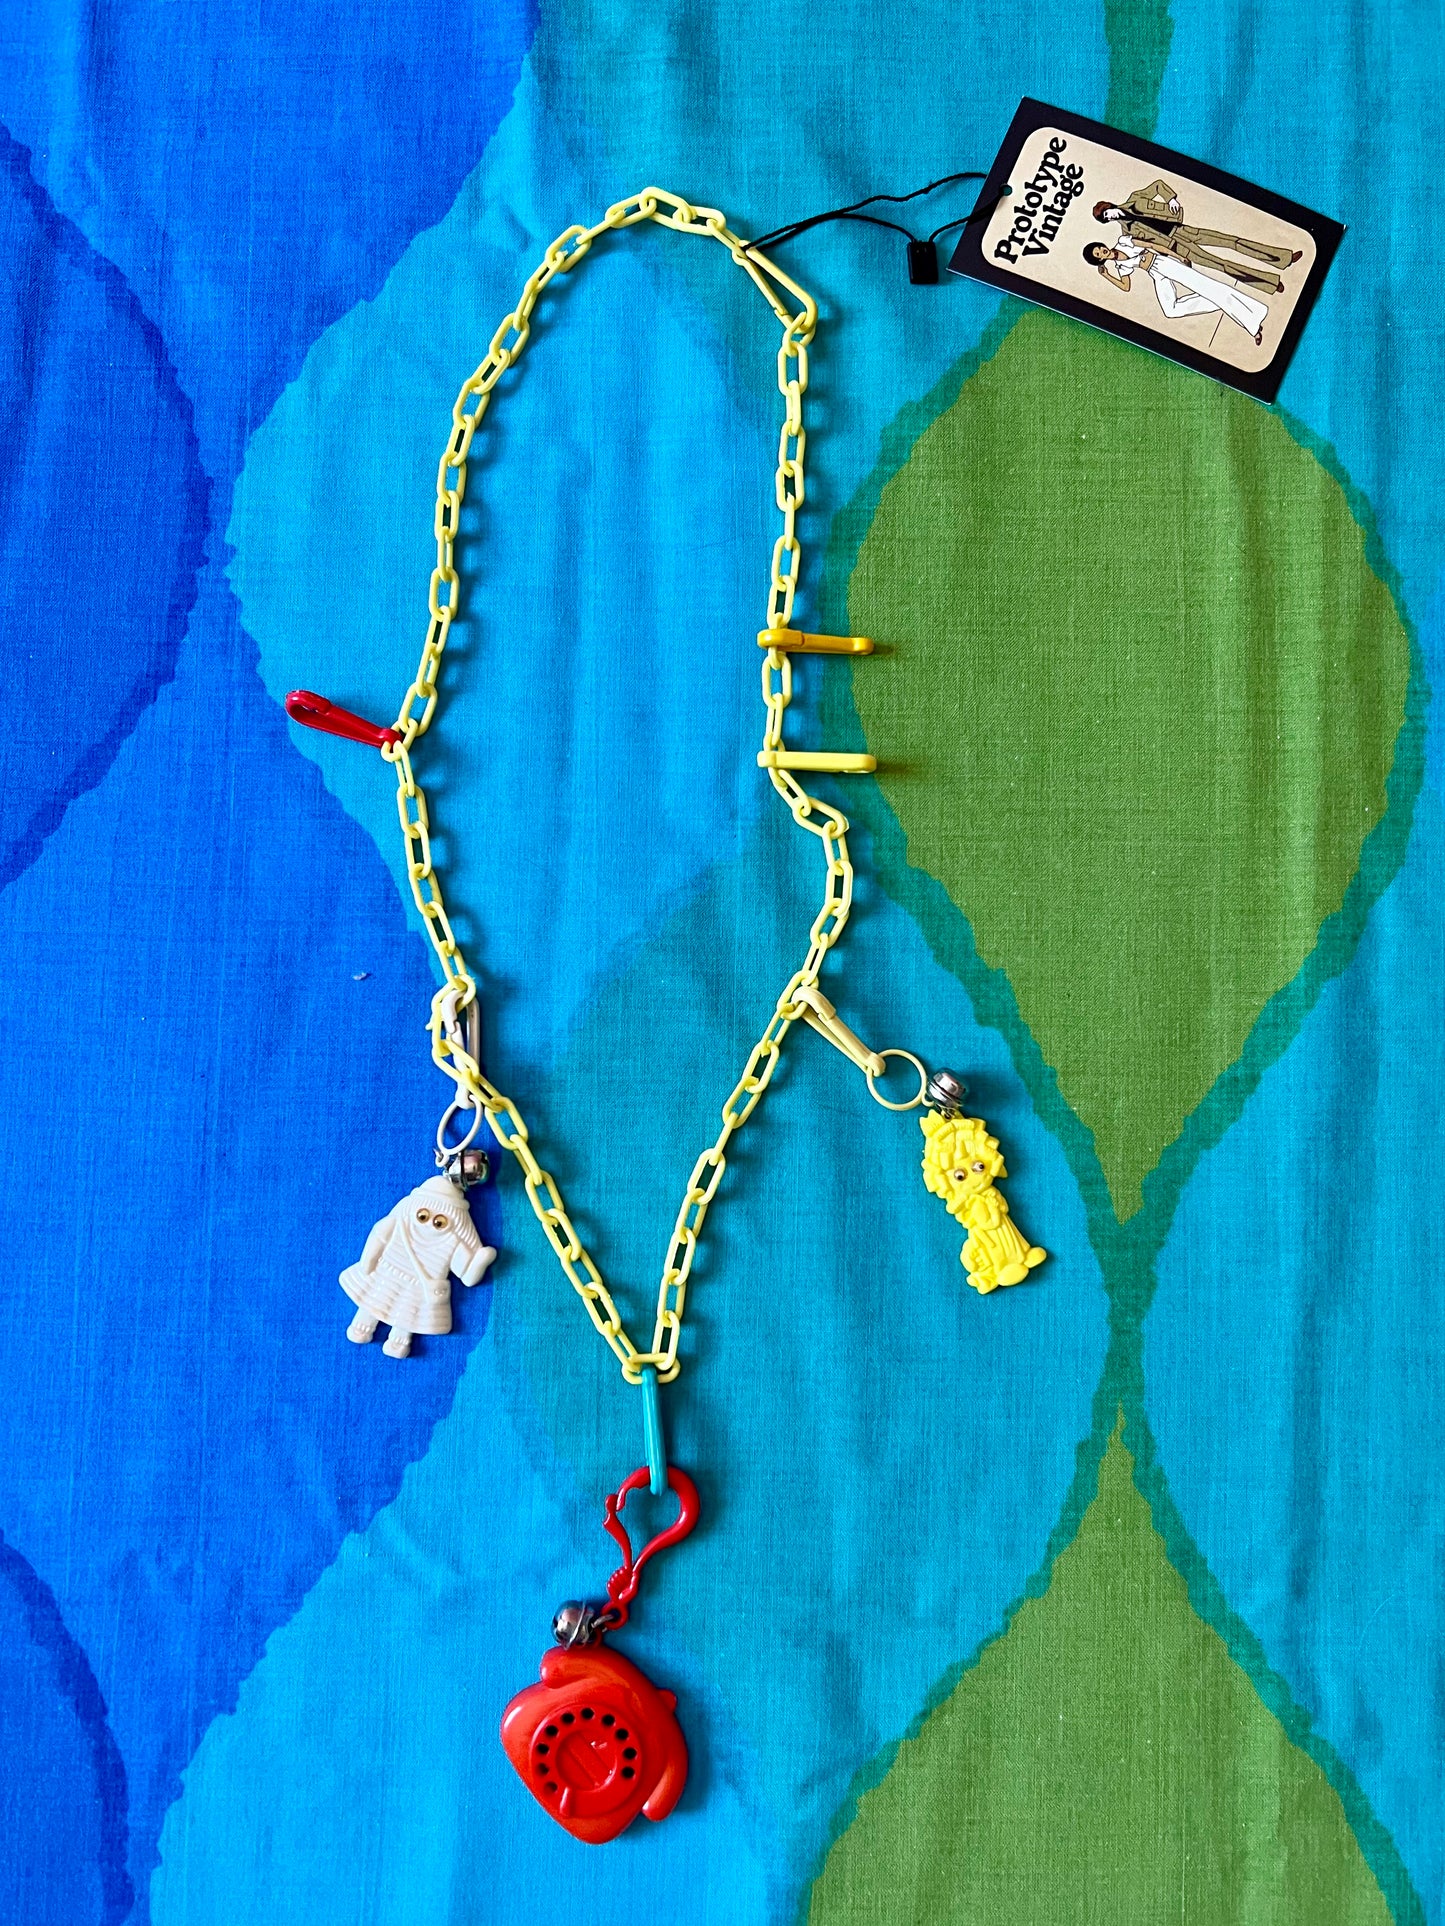 80's Charm Necklace